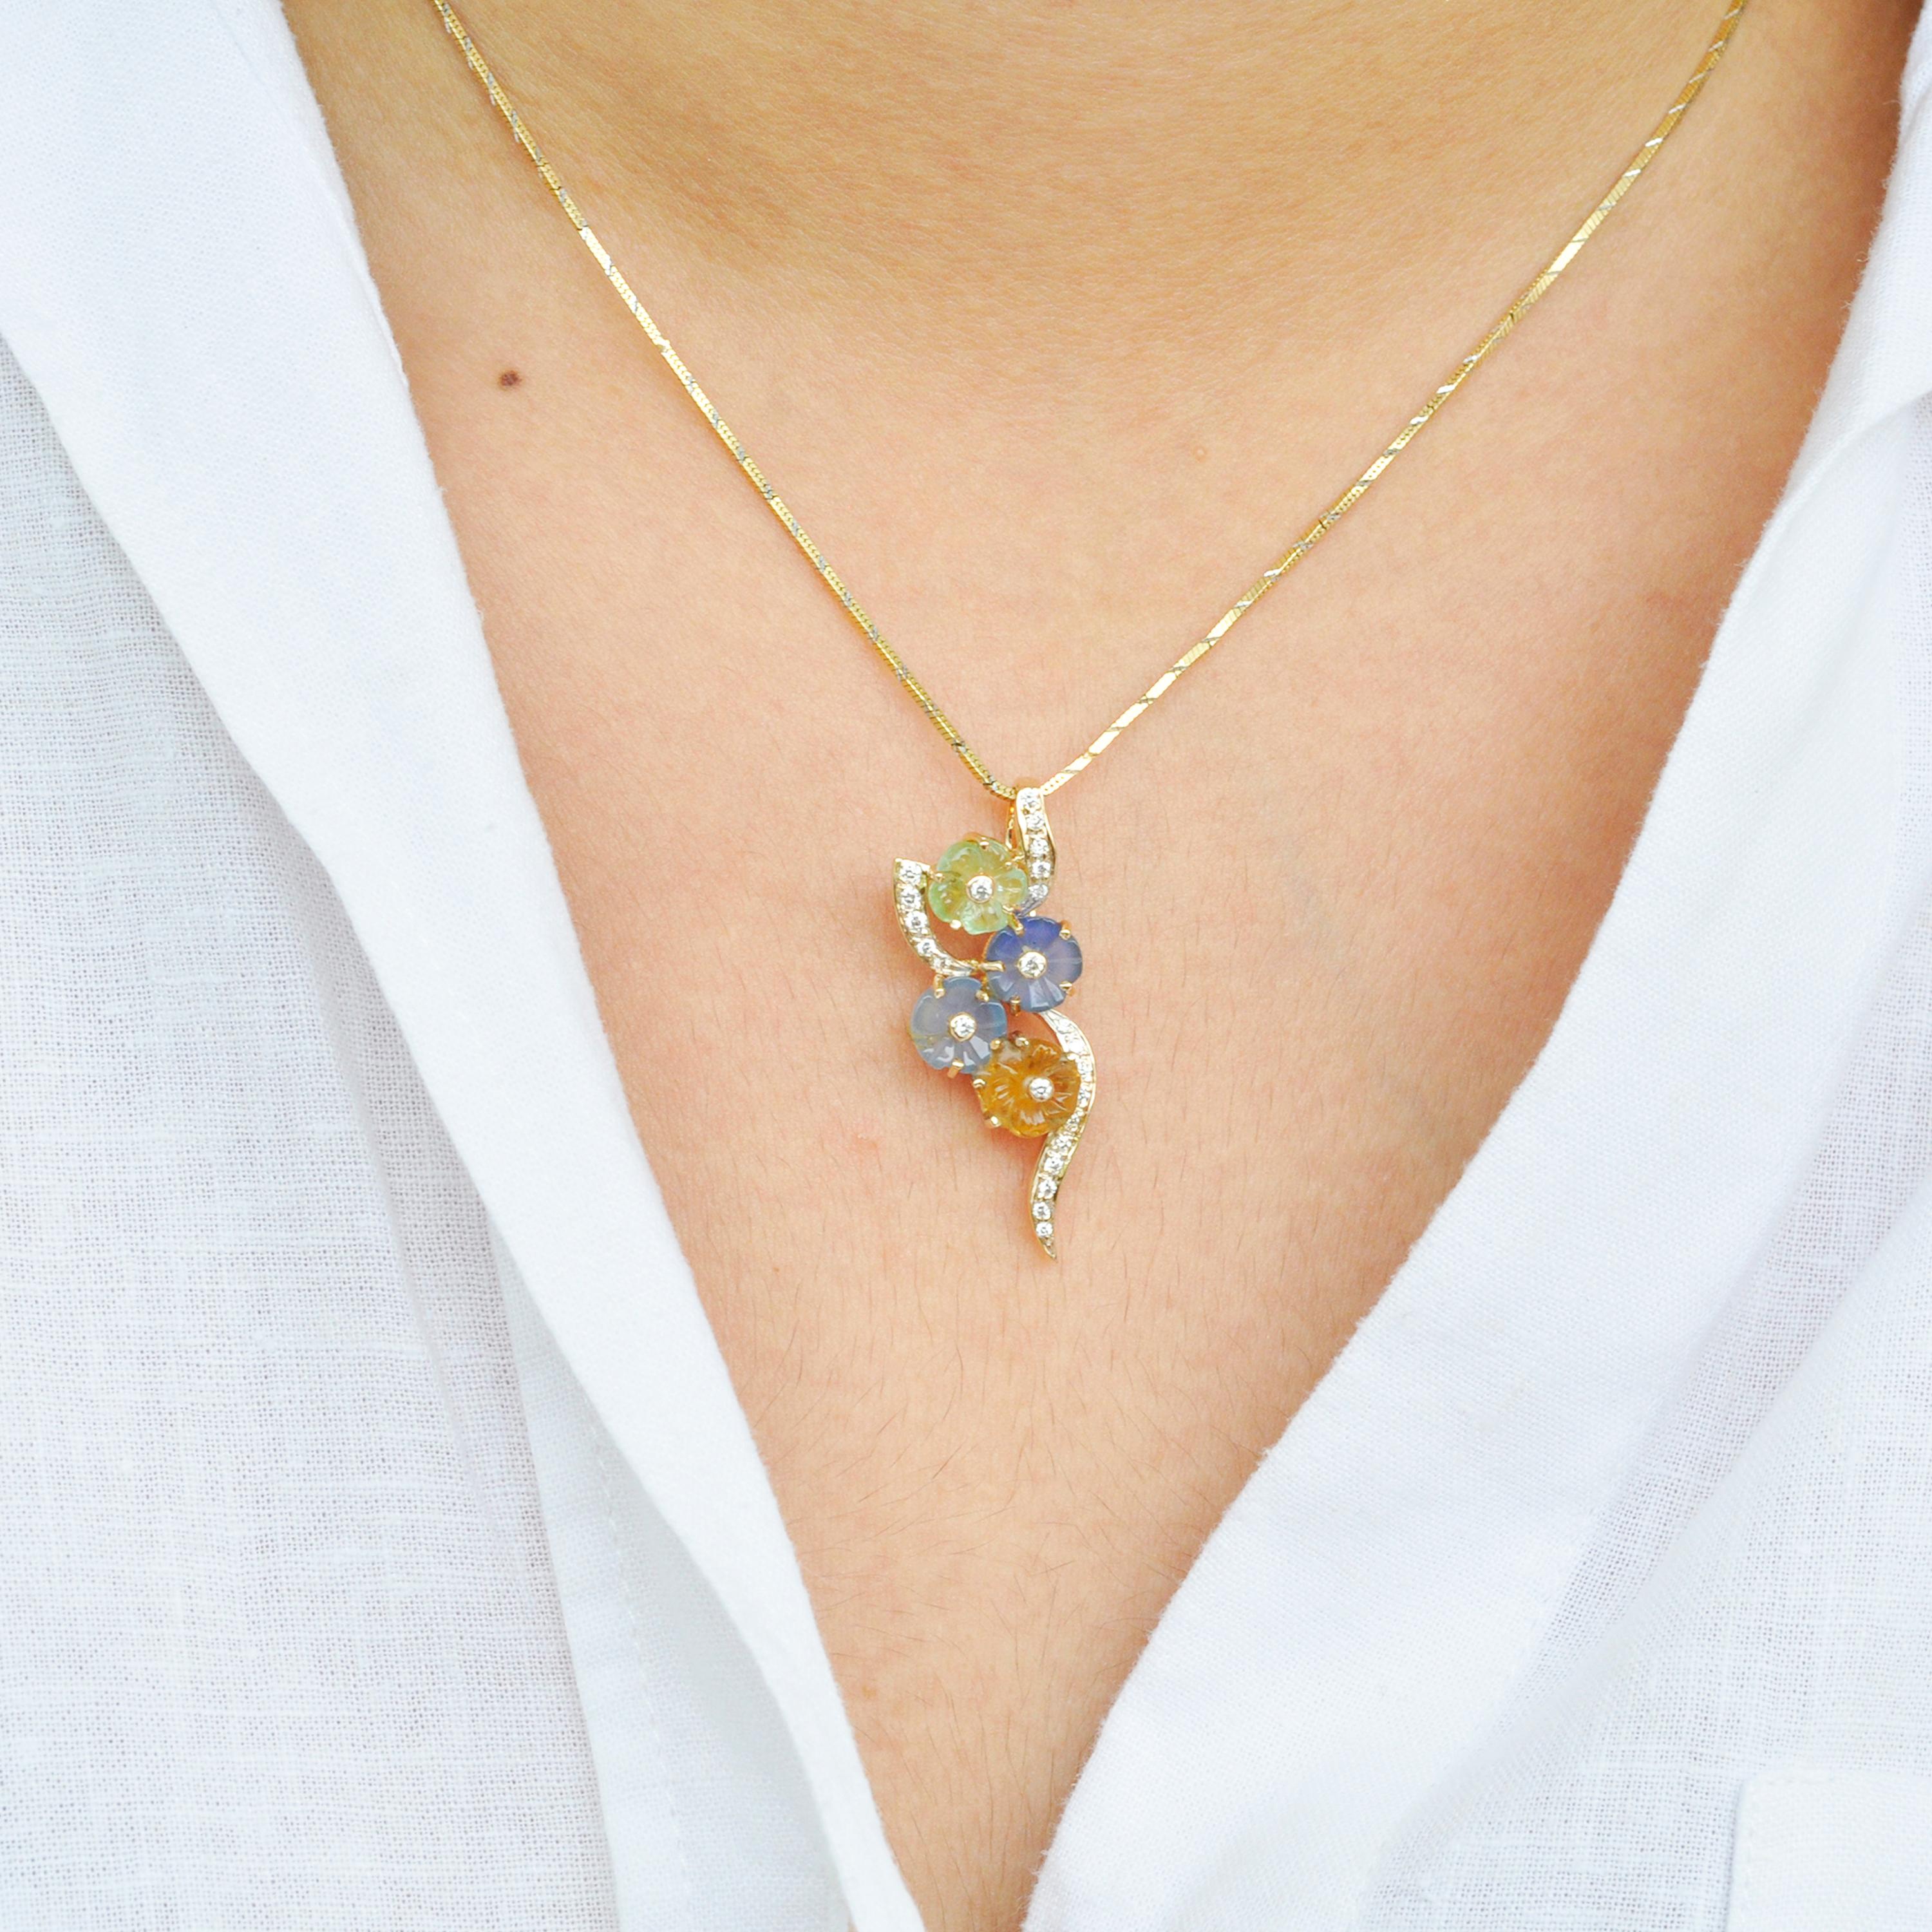 18 karat yellow gold hand-carved chalcedony flower diamond pendant necklace

Simplicity can never go out of fashion. This simple 18 karat gold pendant necklace is a simple assortment of four chalcedony carved flowers, supported by pave set diamonds.